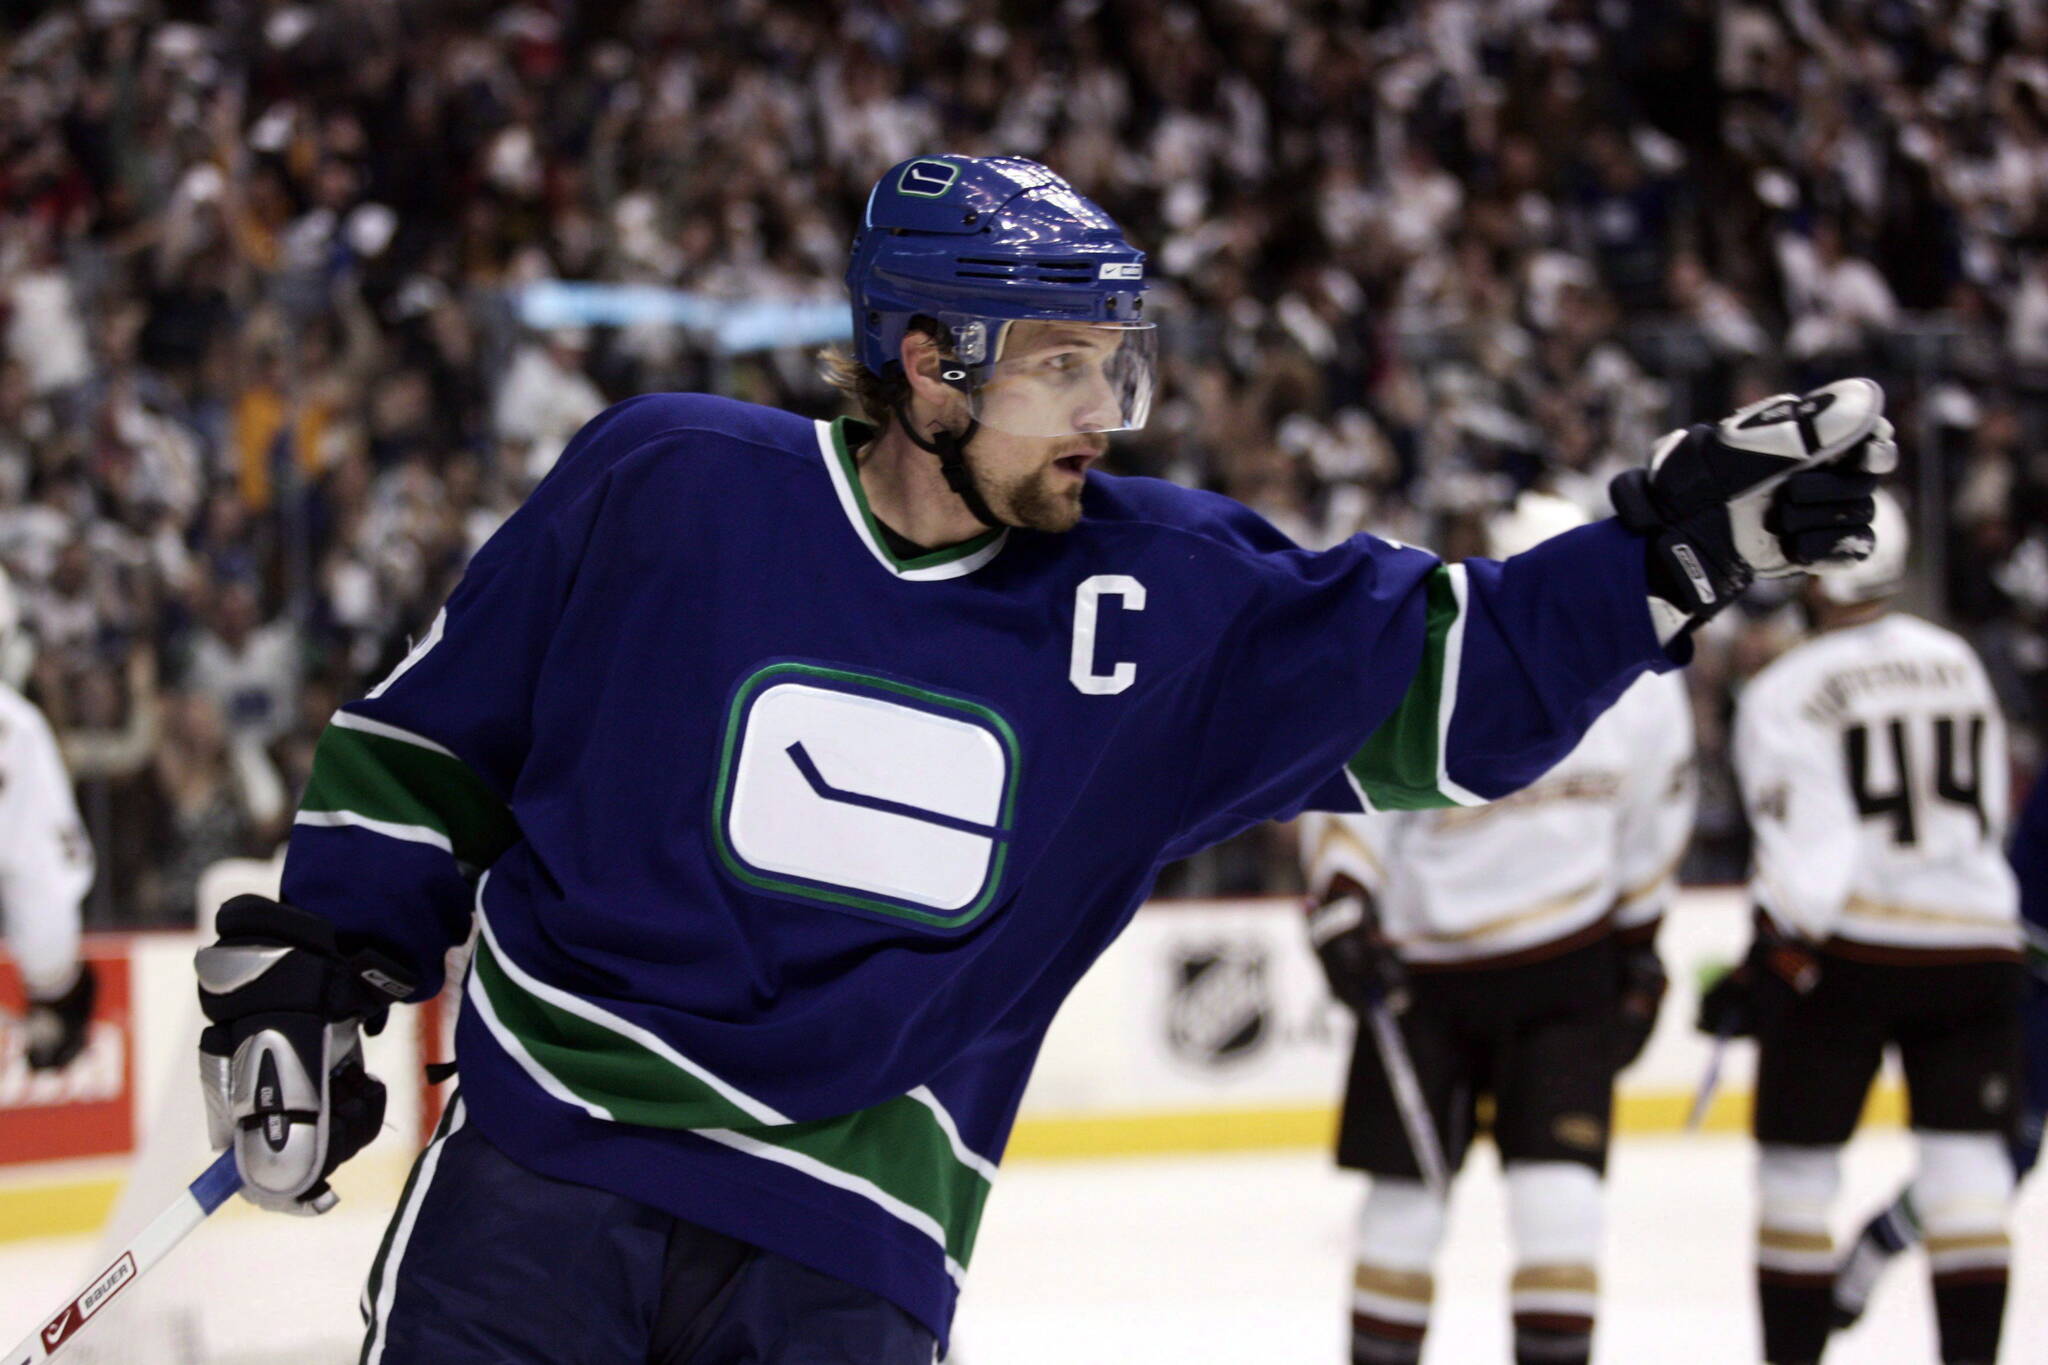 The jerseys and logos worn by the Vancouver Canucks — and, consequently, their fans — have seen several drastic changes in the four decades since the team entered the NHL, and pretty much all of those iterations can be spotted in the throngs of people out celebrating the playoffs in recent weeks. In this April 29, 2007 file photo, Vancouver Canucks' Markus Naslund celebrates after scoring against the Anaheim Ducks during the first period of an NHL playoff hockey game in Vancouver. THE CANADIAN PRESS/Richard Lam